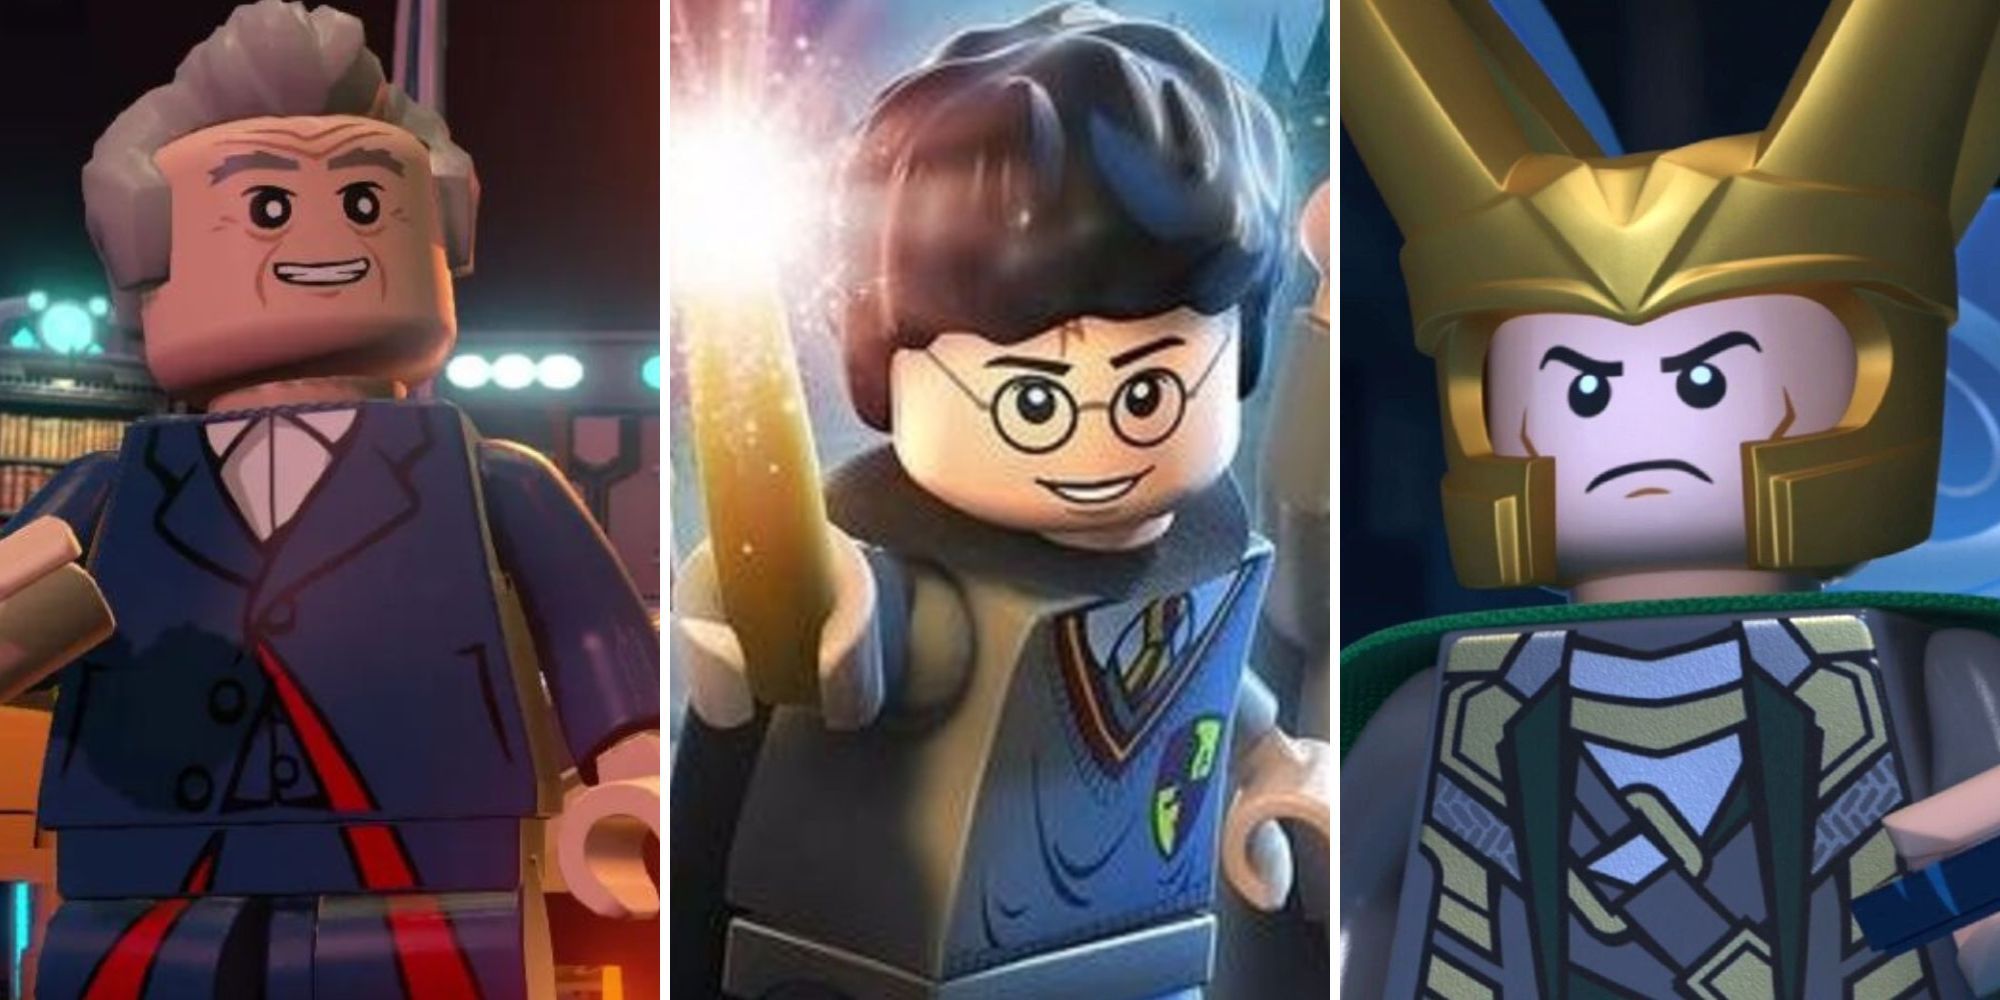 A grid of images showing the Lego games Lego Dimensions, Lego Harry Potter: Years 1-4, and Lego Marvel Super Heroes 